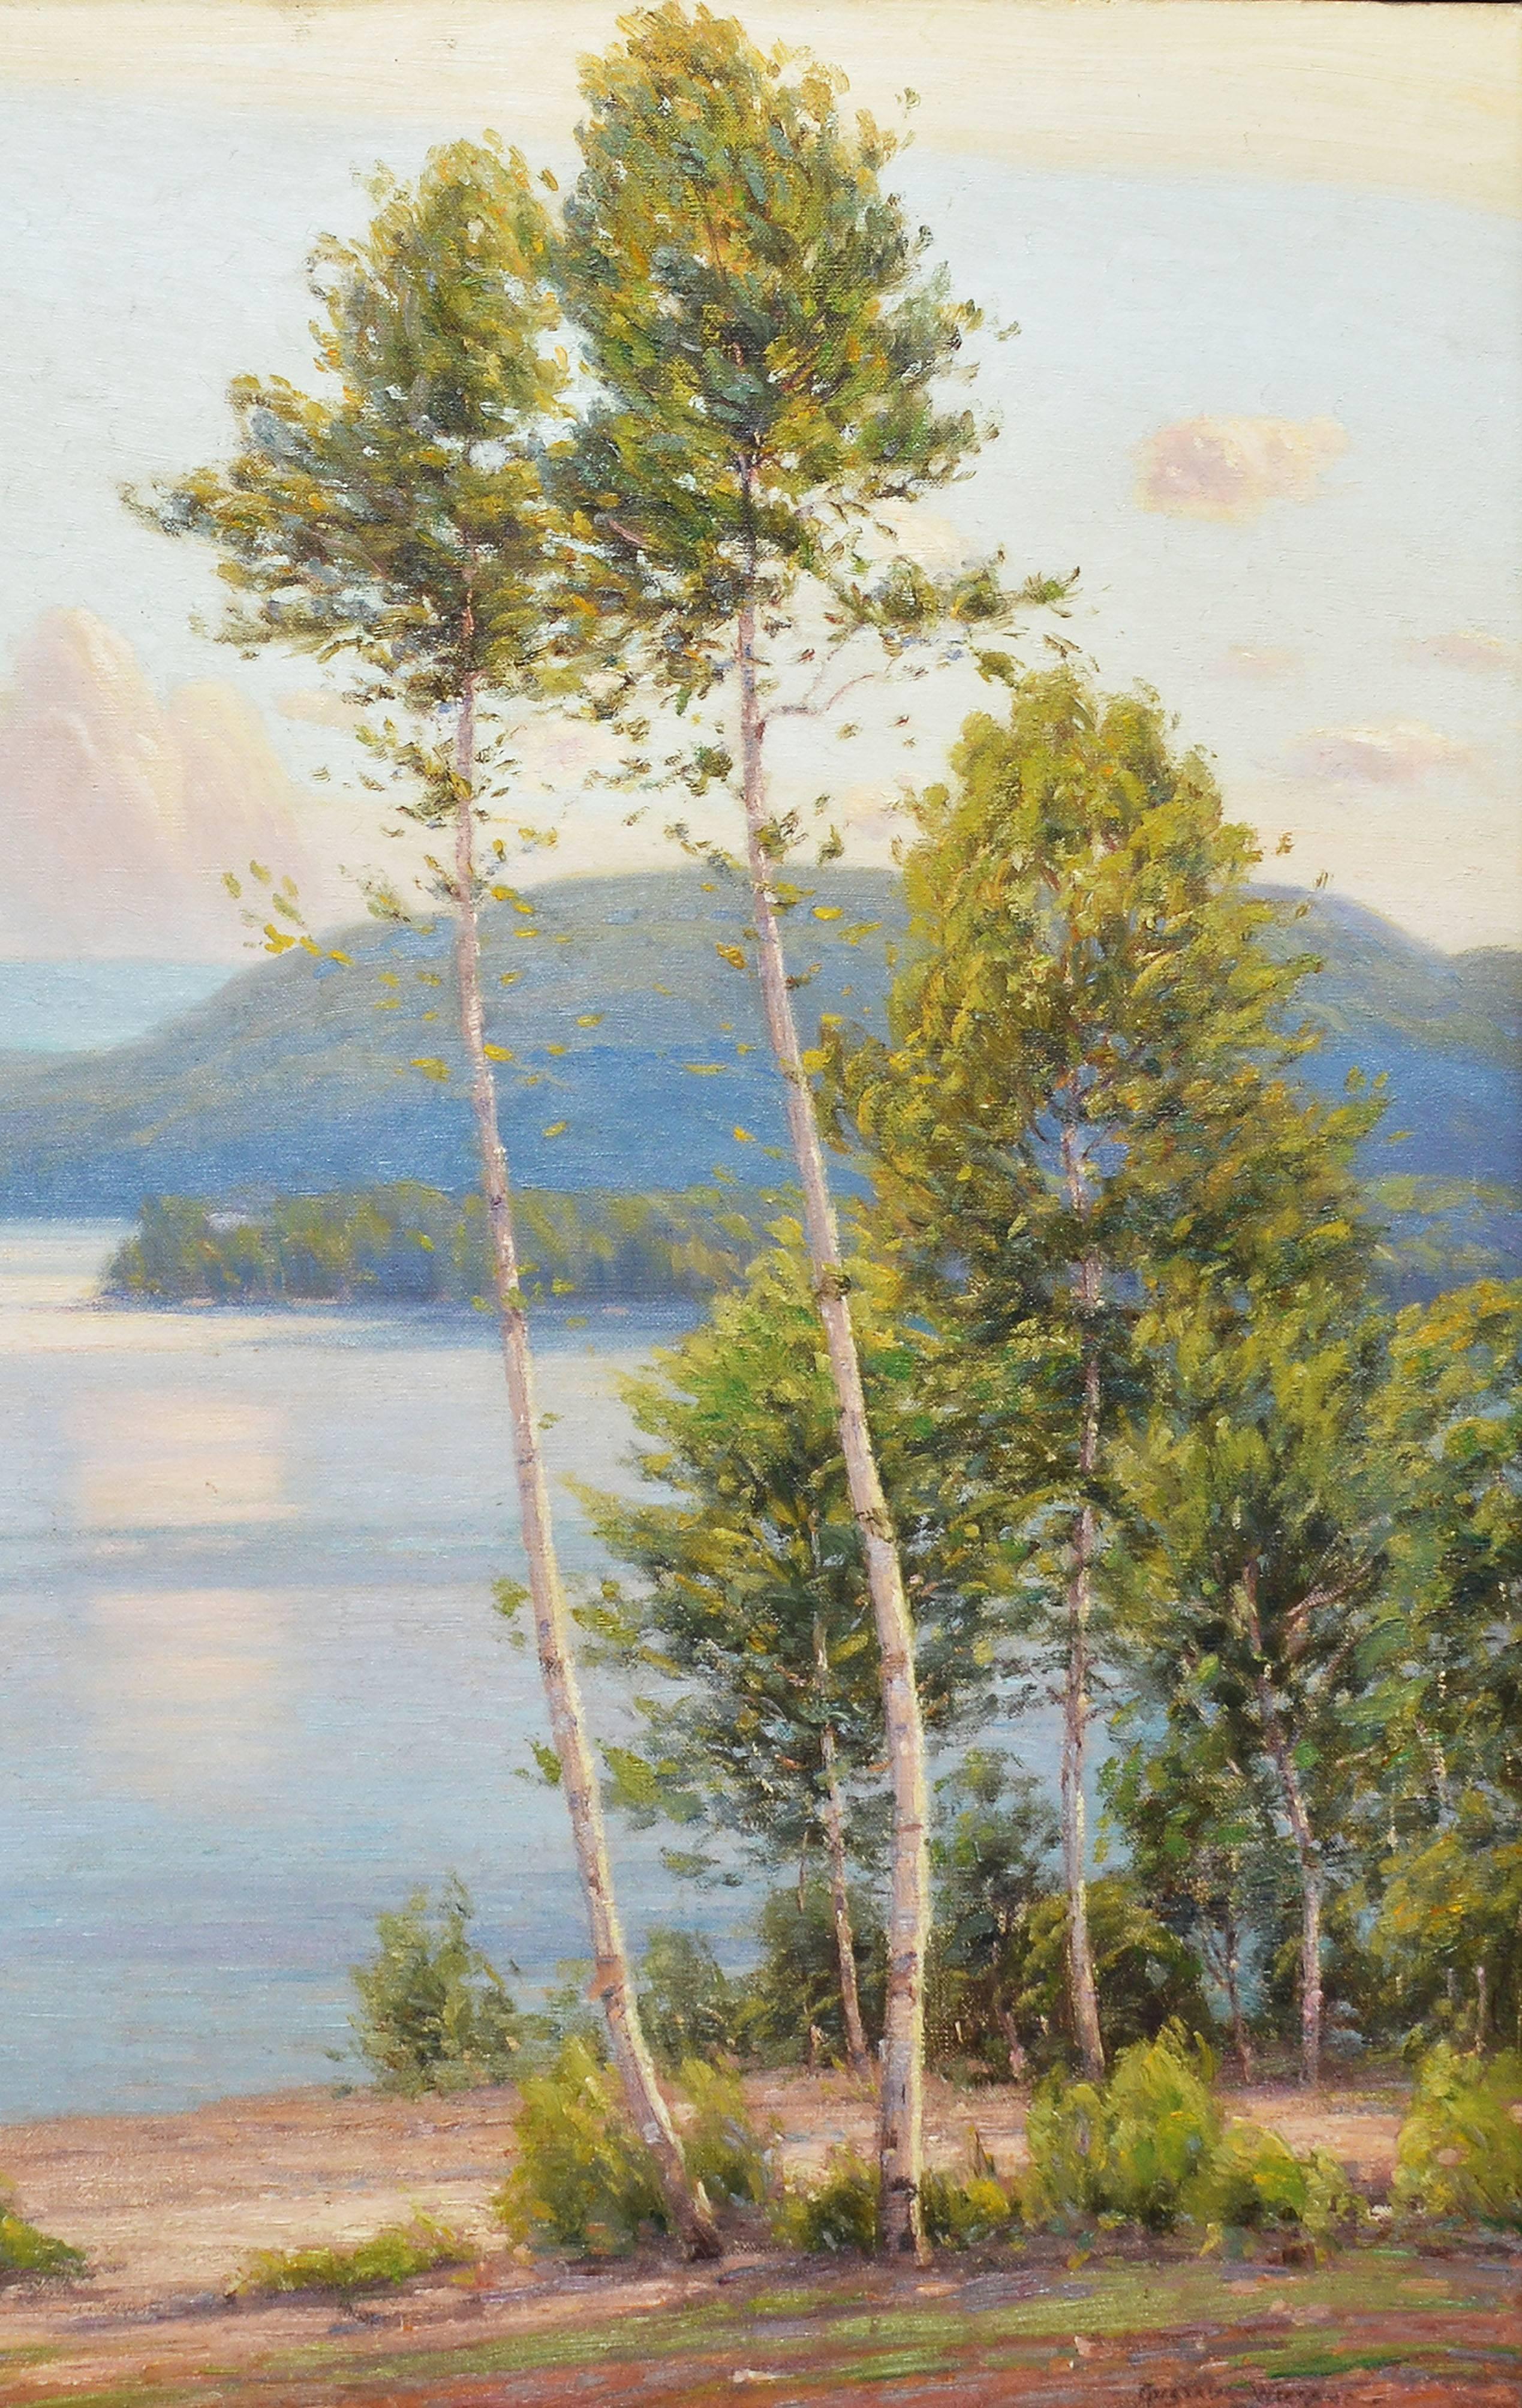 Sunset at Lake George by Gustave Wiegand - Impressionist Painting by Gustave Adolph Wiegand